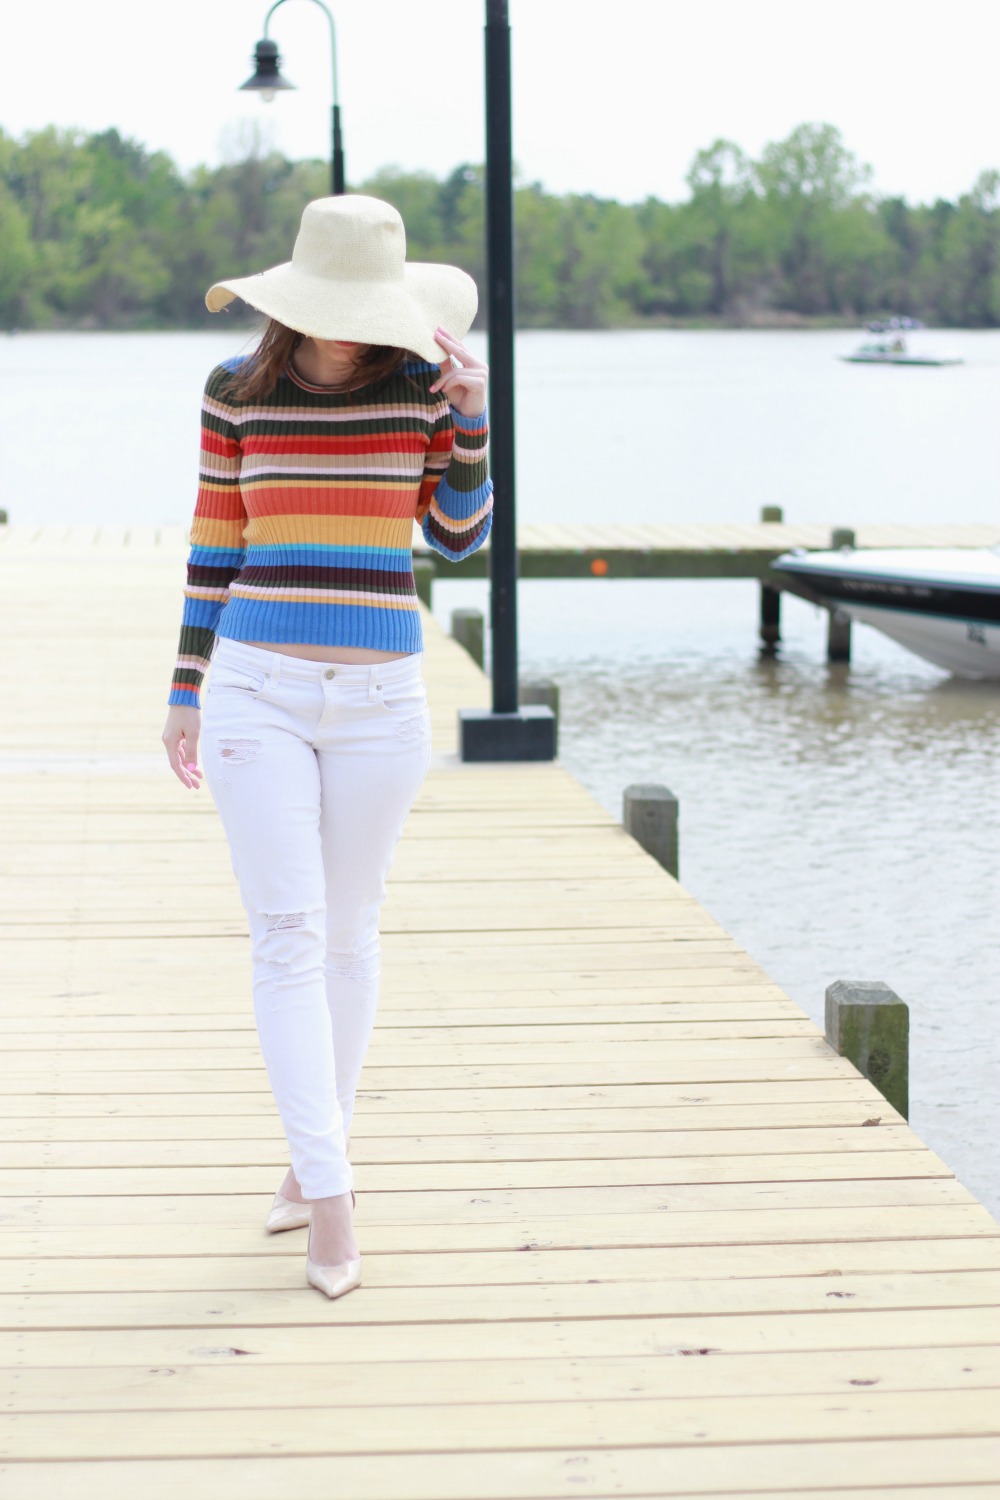 rainbow sweater-spring and summer outfit perfect for a day at the lake | BNBstyling.com